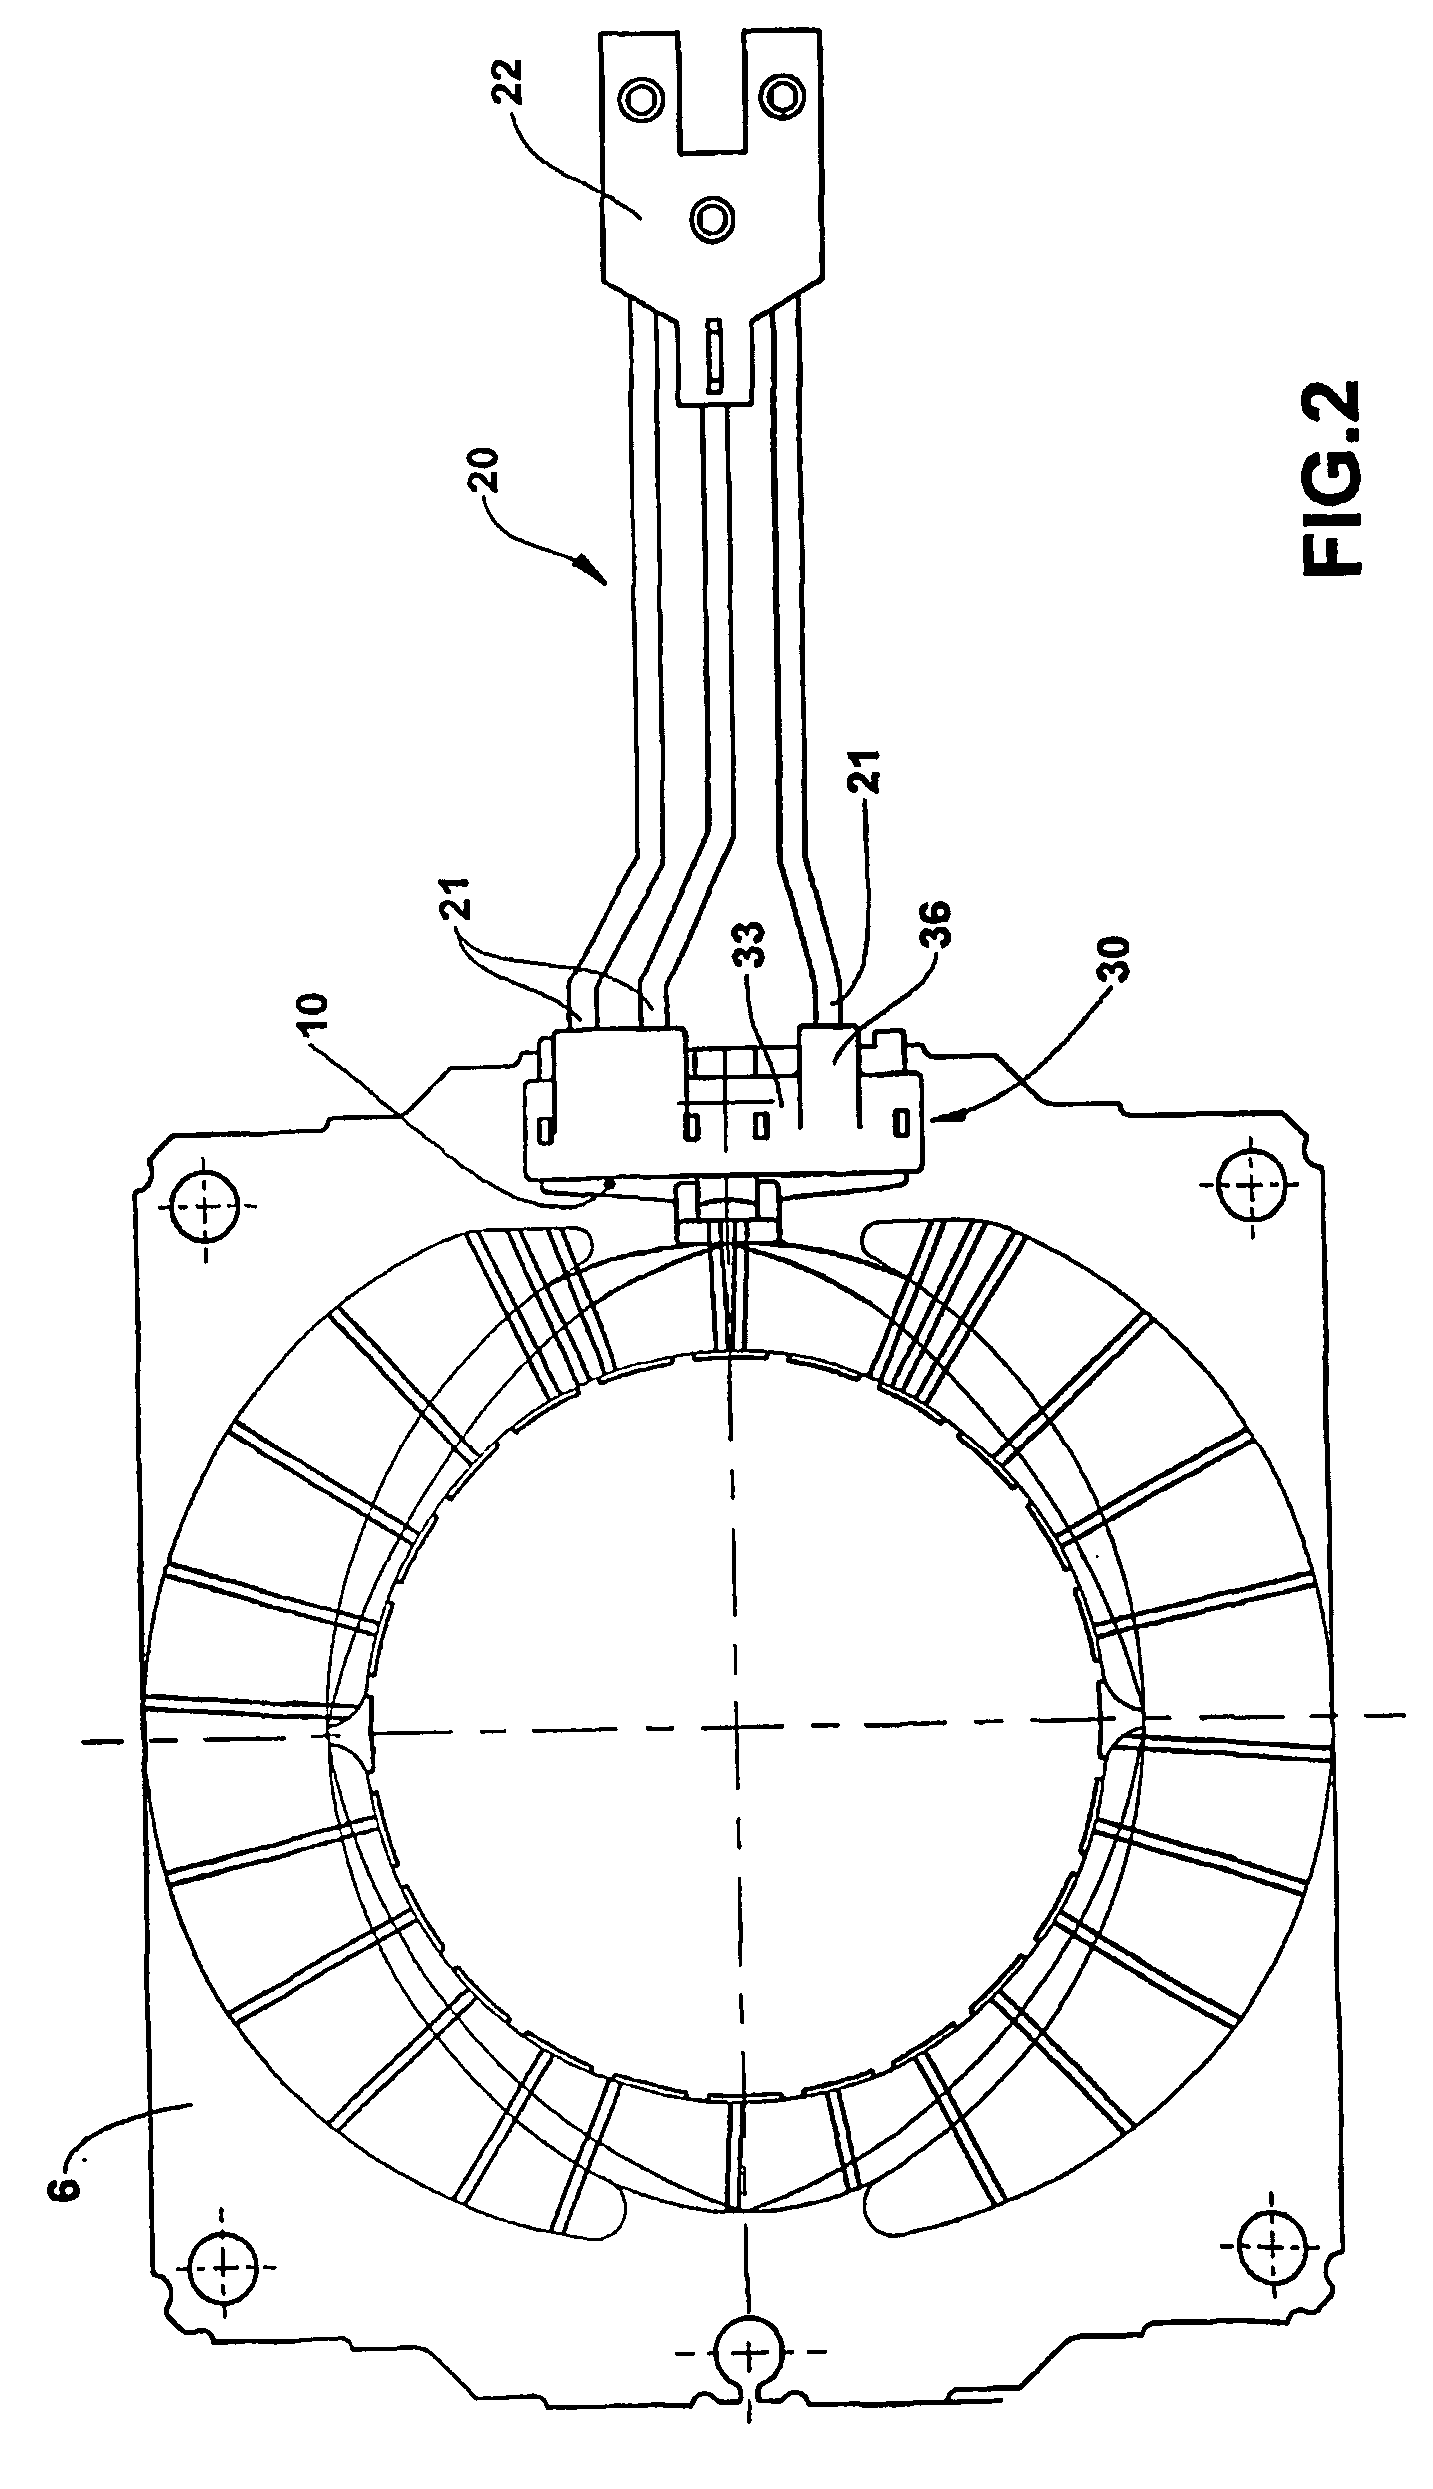 Electric connector for the motor of a hermetic compressor and its manufacturing process